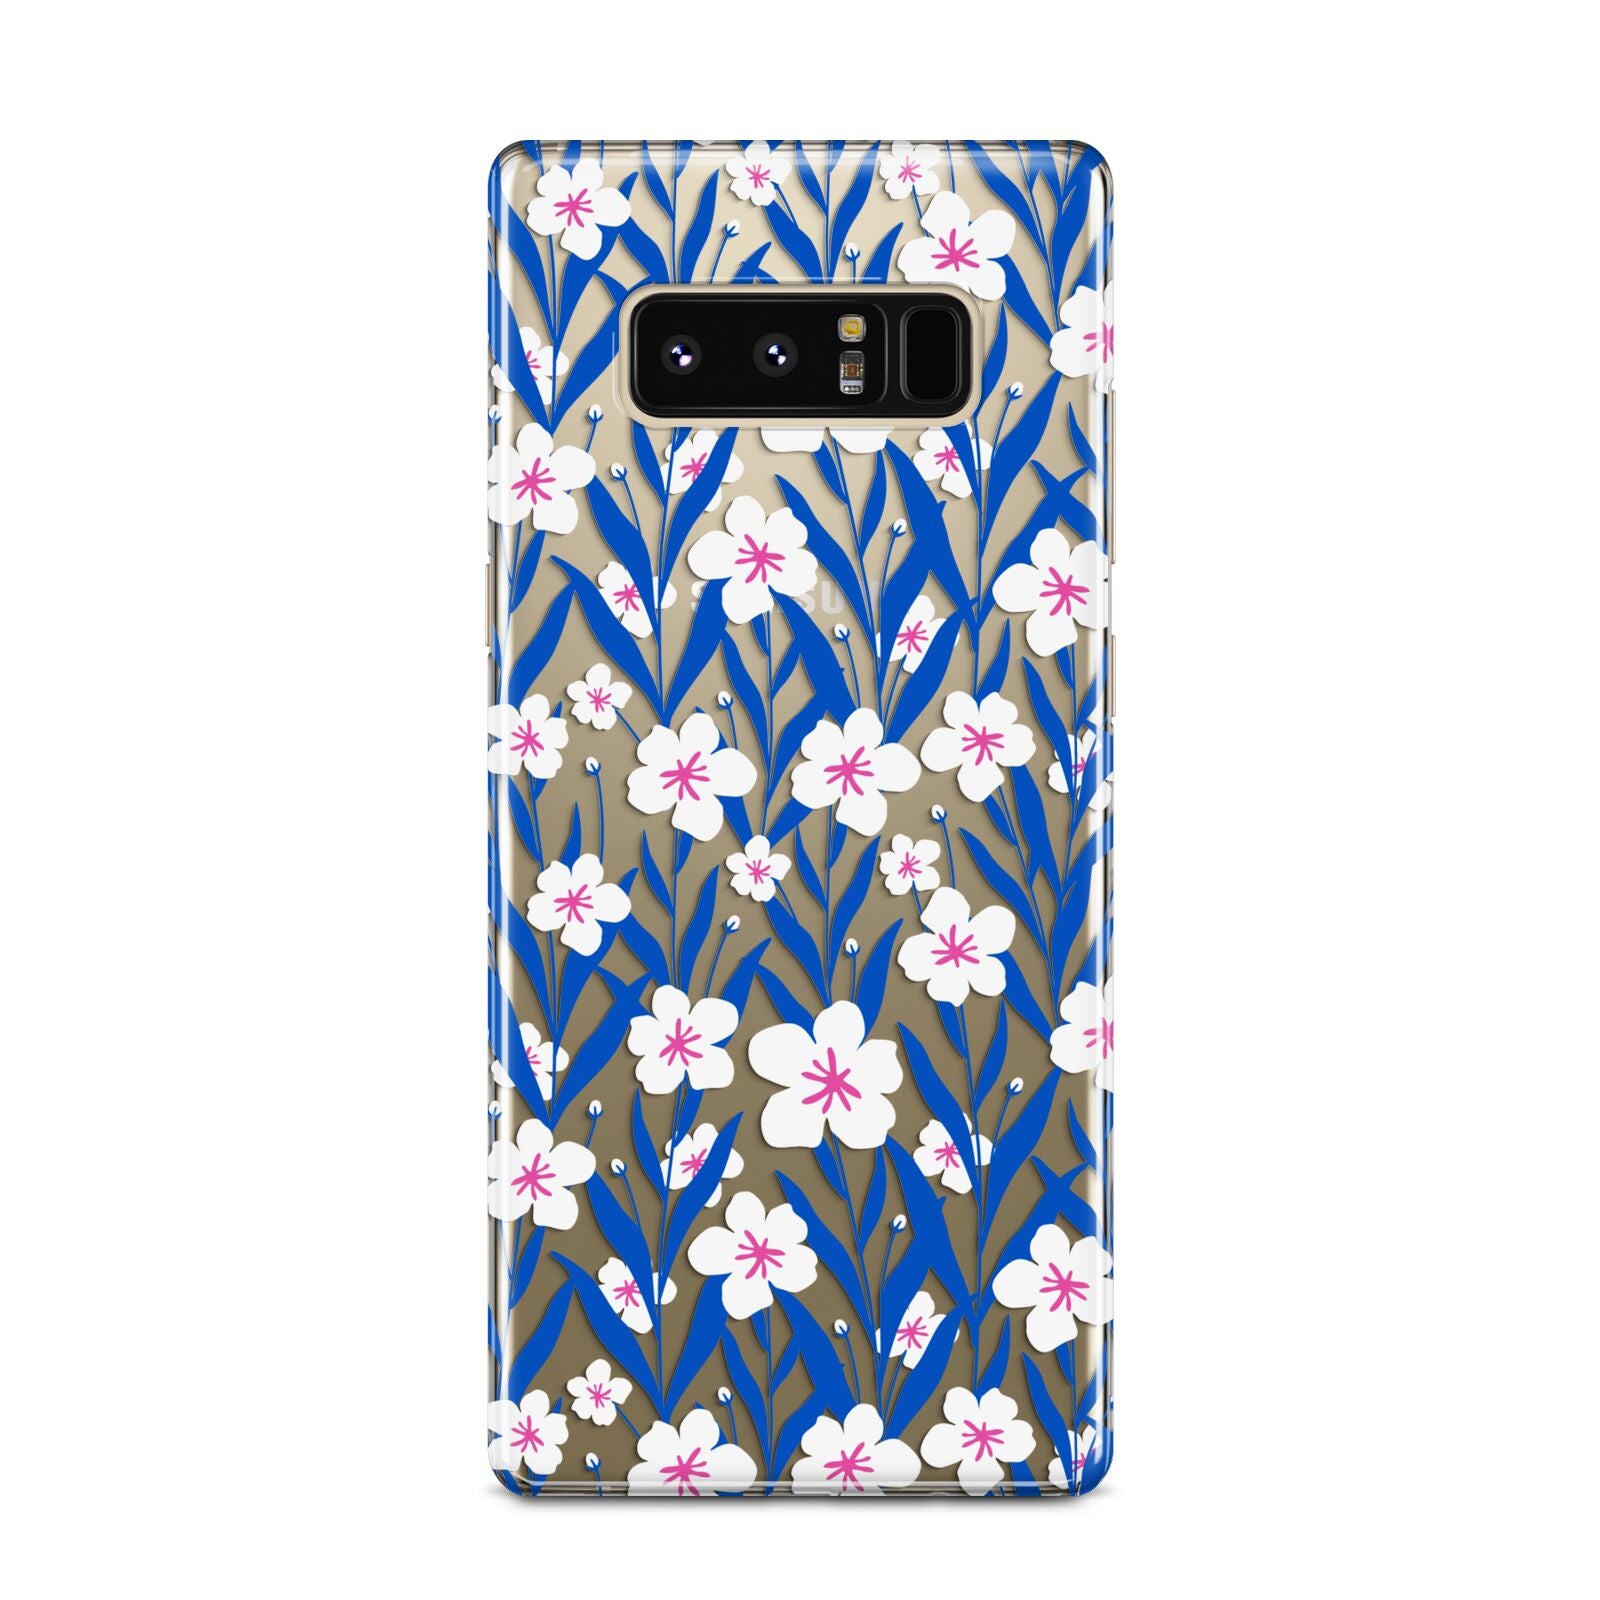 Blue and White Flowers Samsung Galaxy Note 8 Case